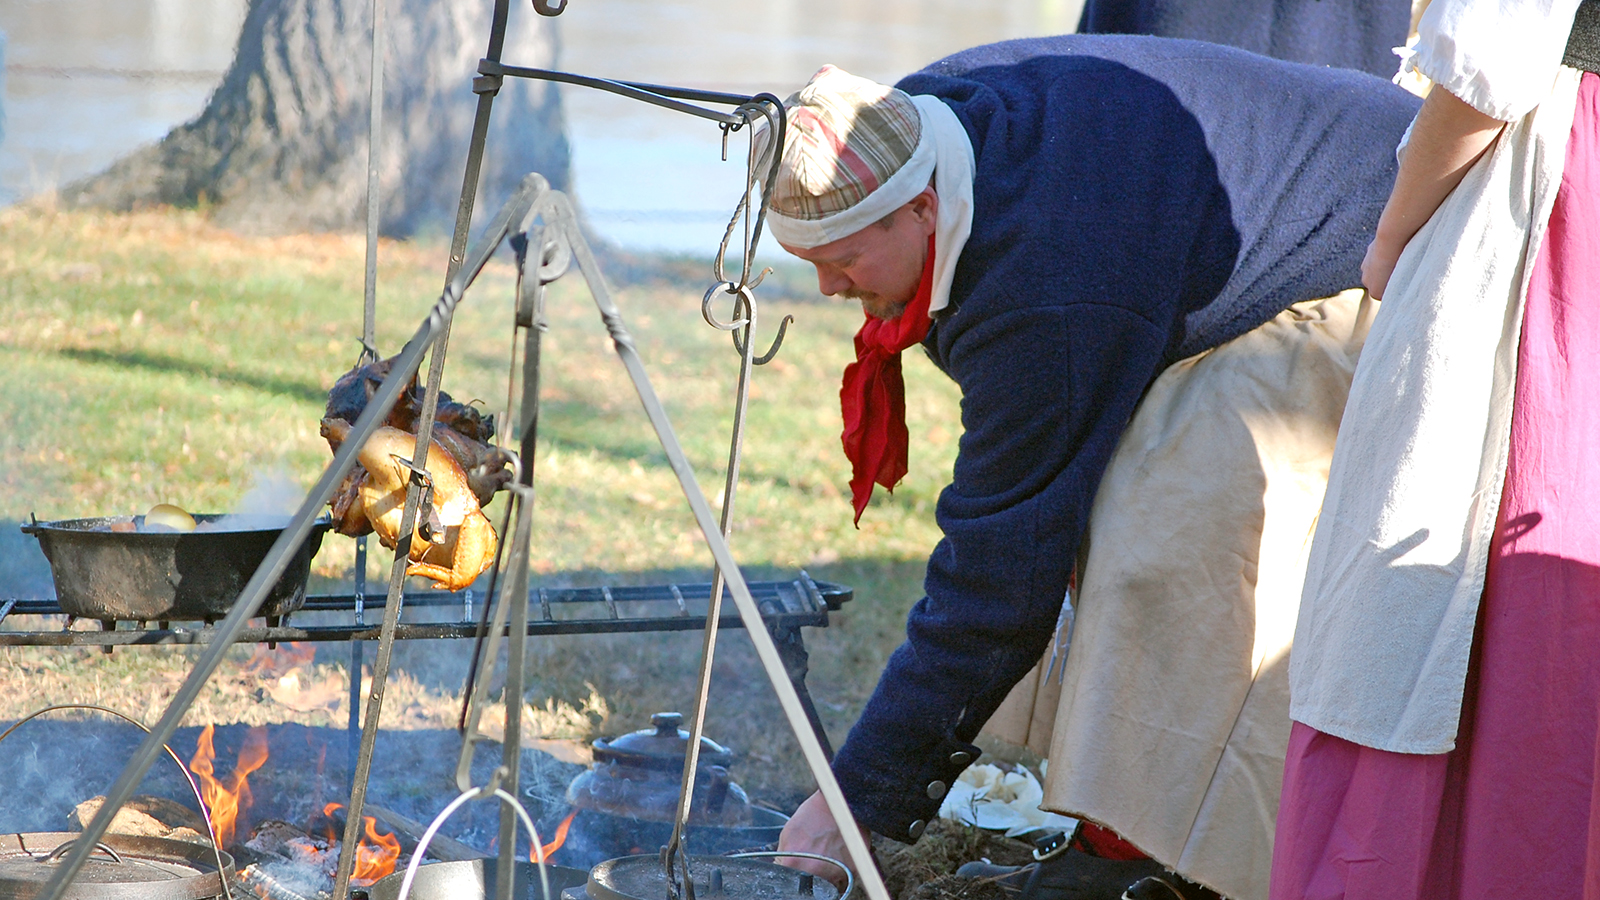 A man leans over a campfire being used to cook a chicken.